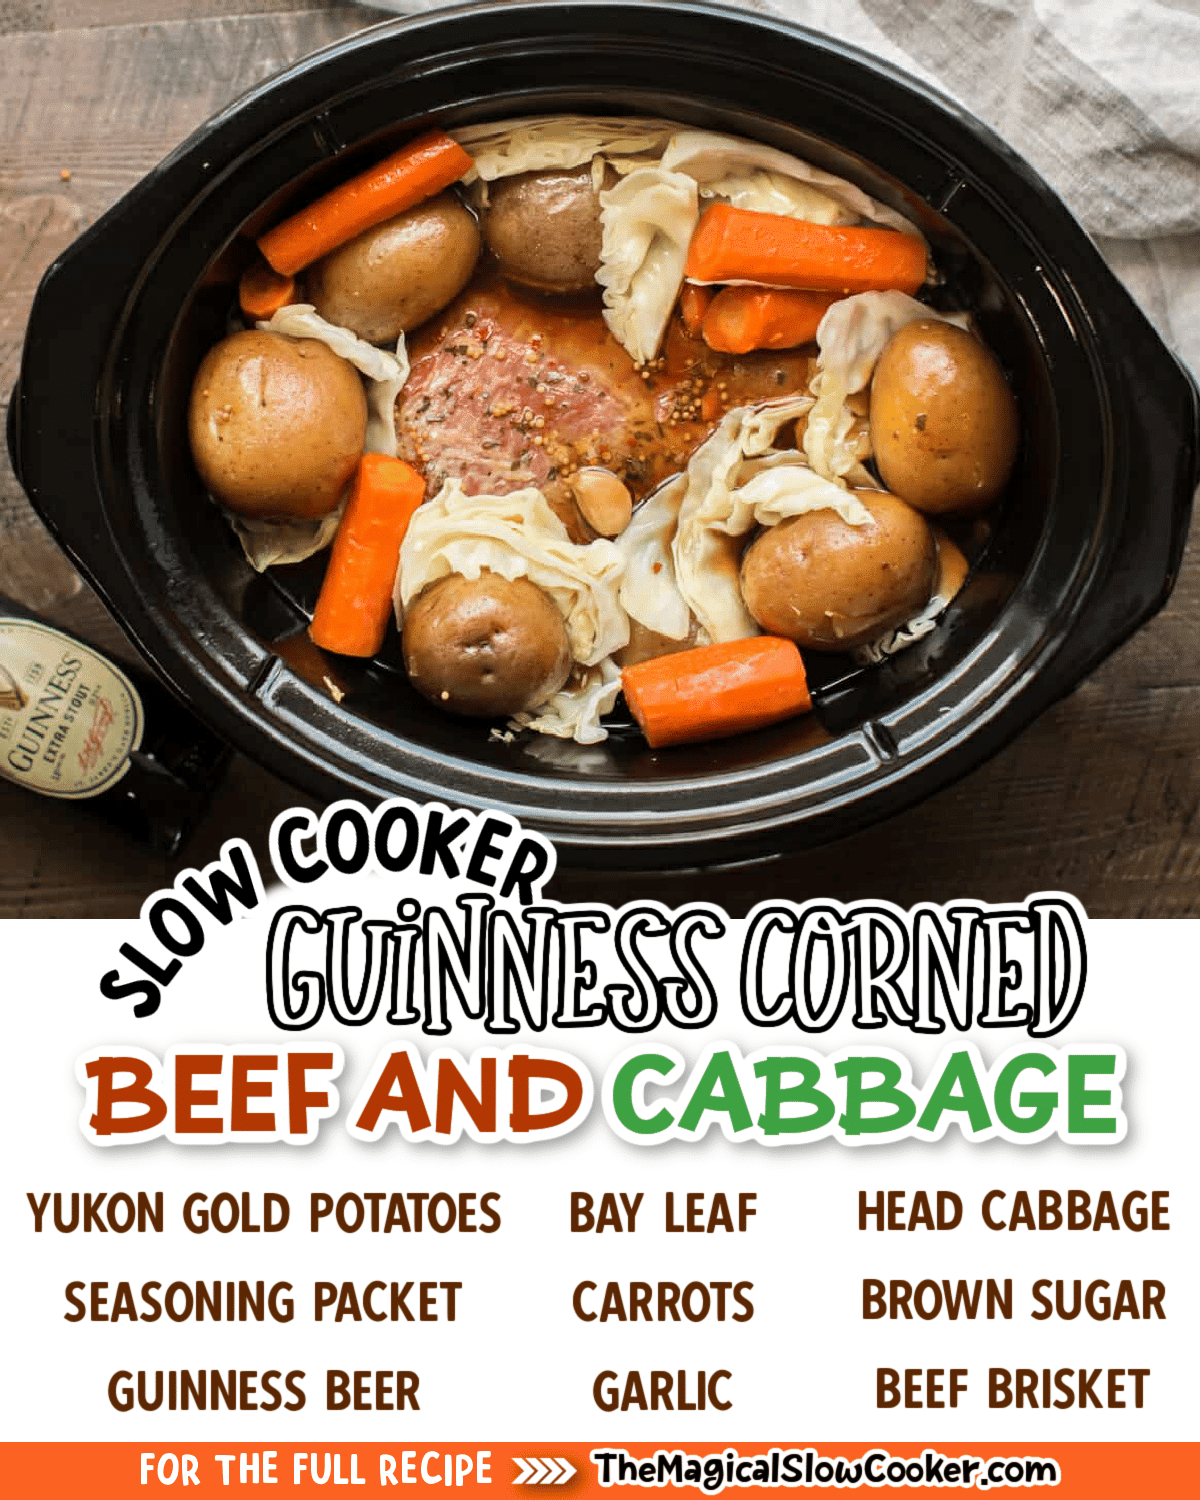 Collage of Guinness corned beef images with text of ingredients.